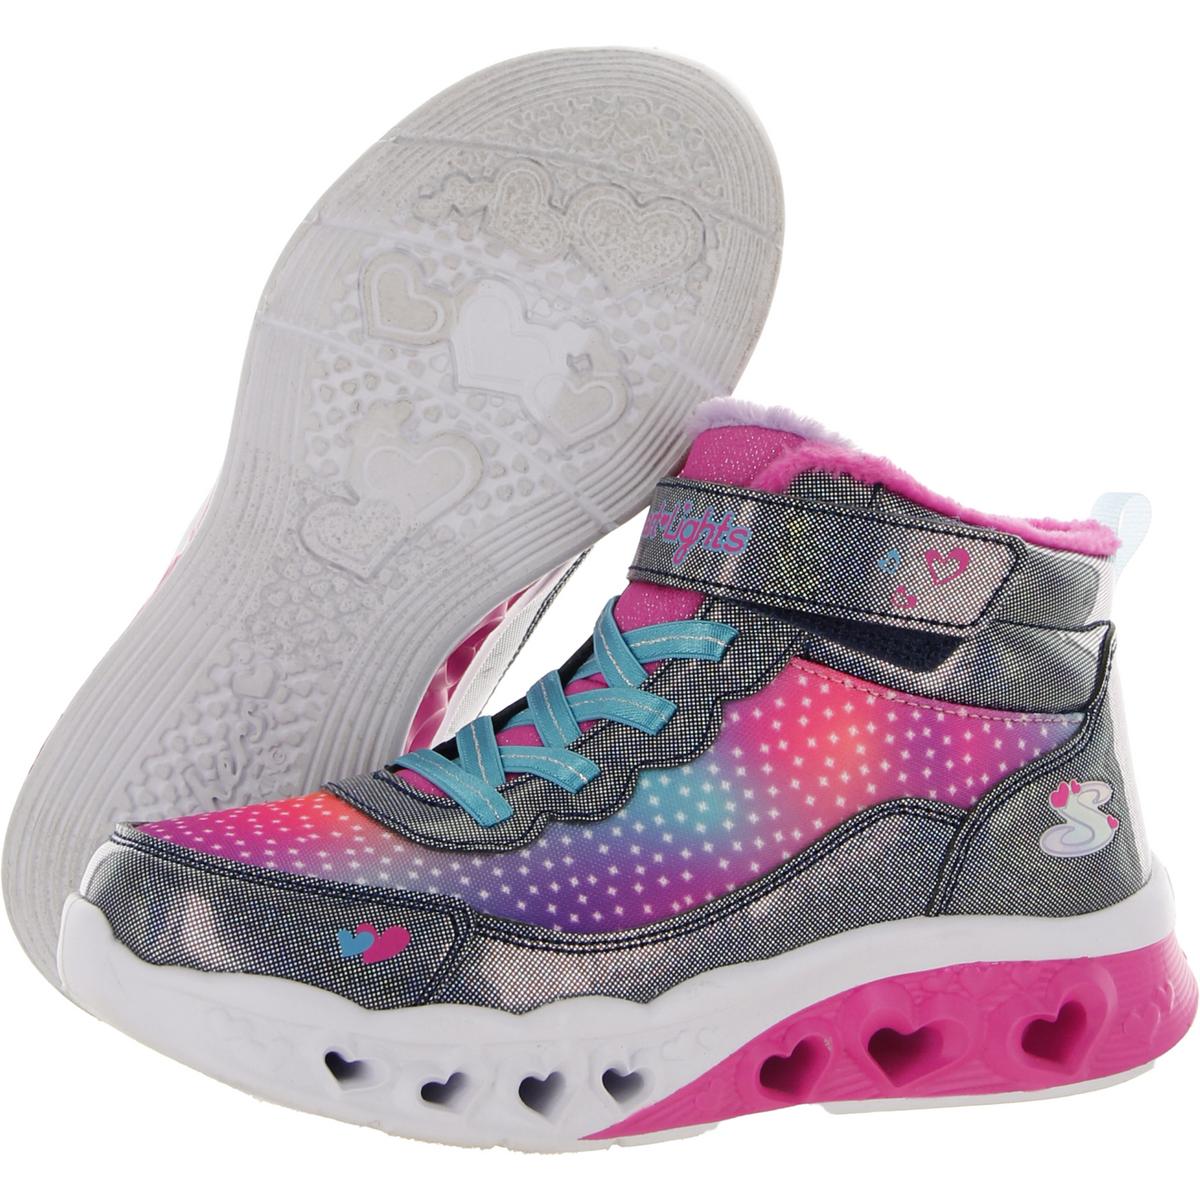 Skechers Simple Amor Girls Faux Fur High Top Light-Up Shoes